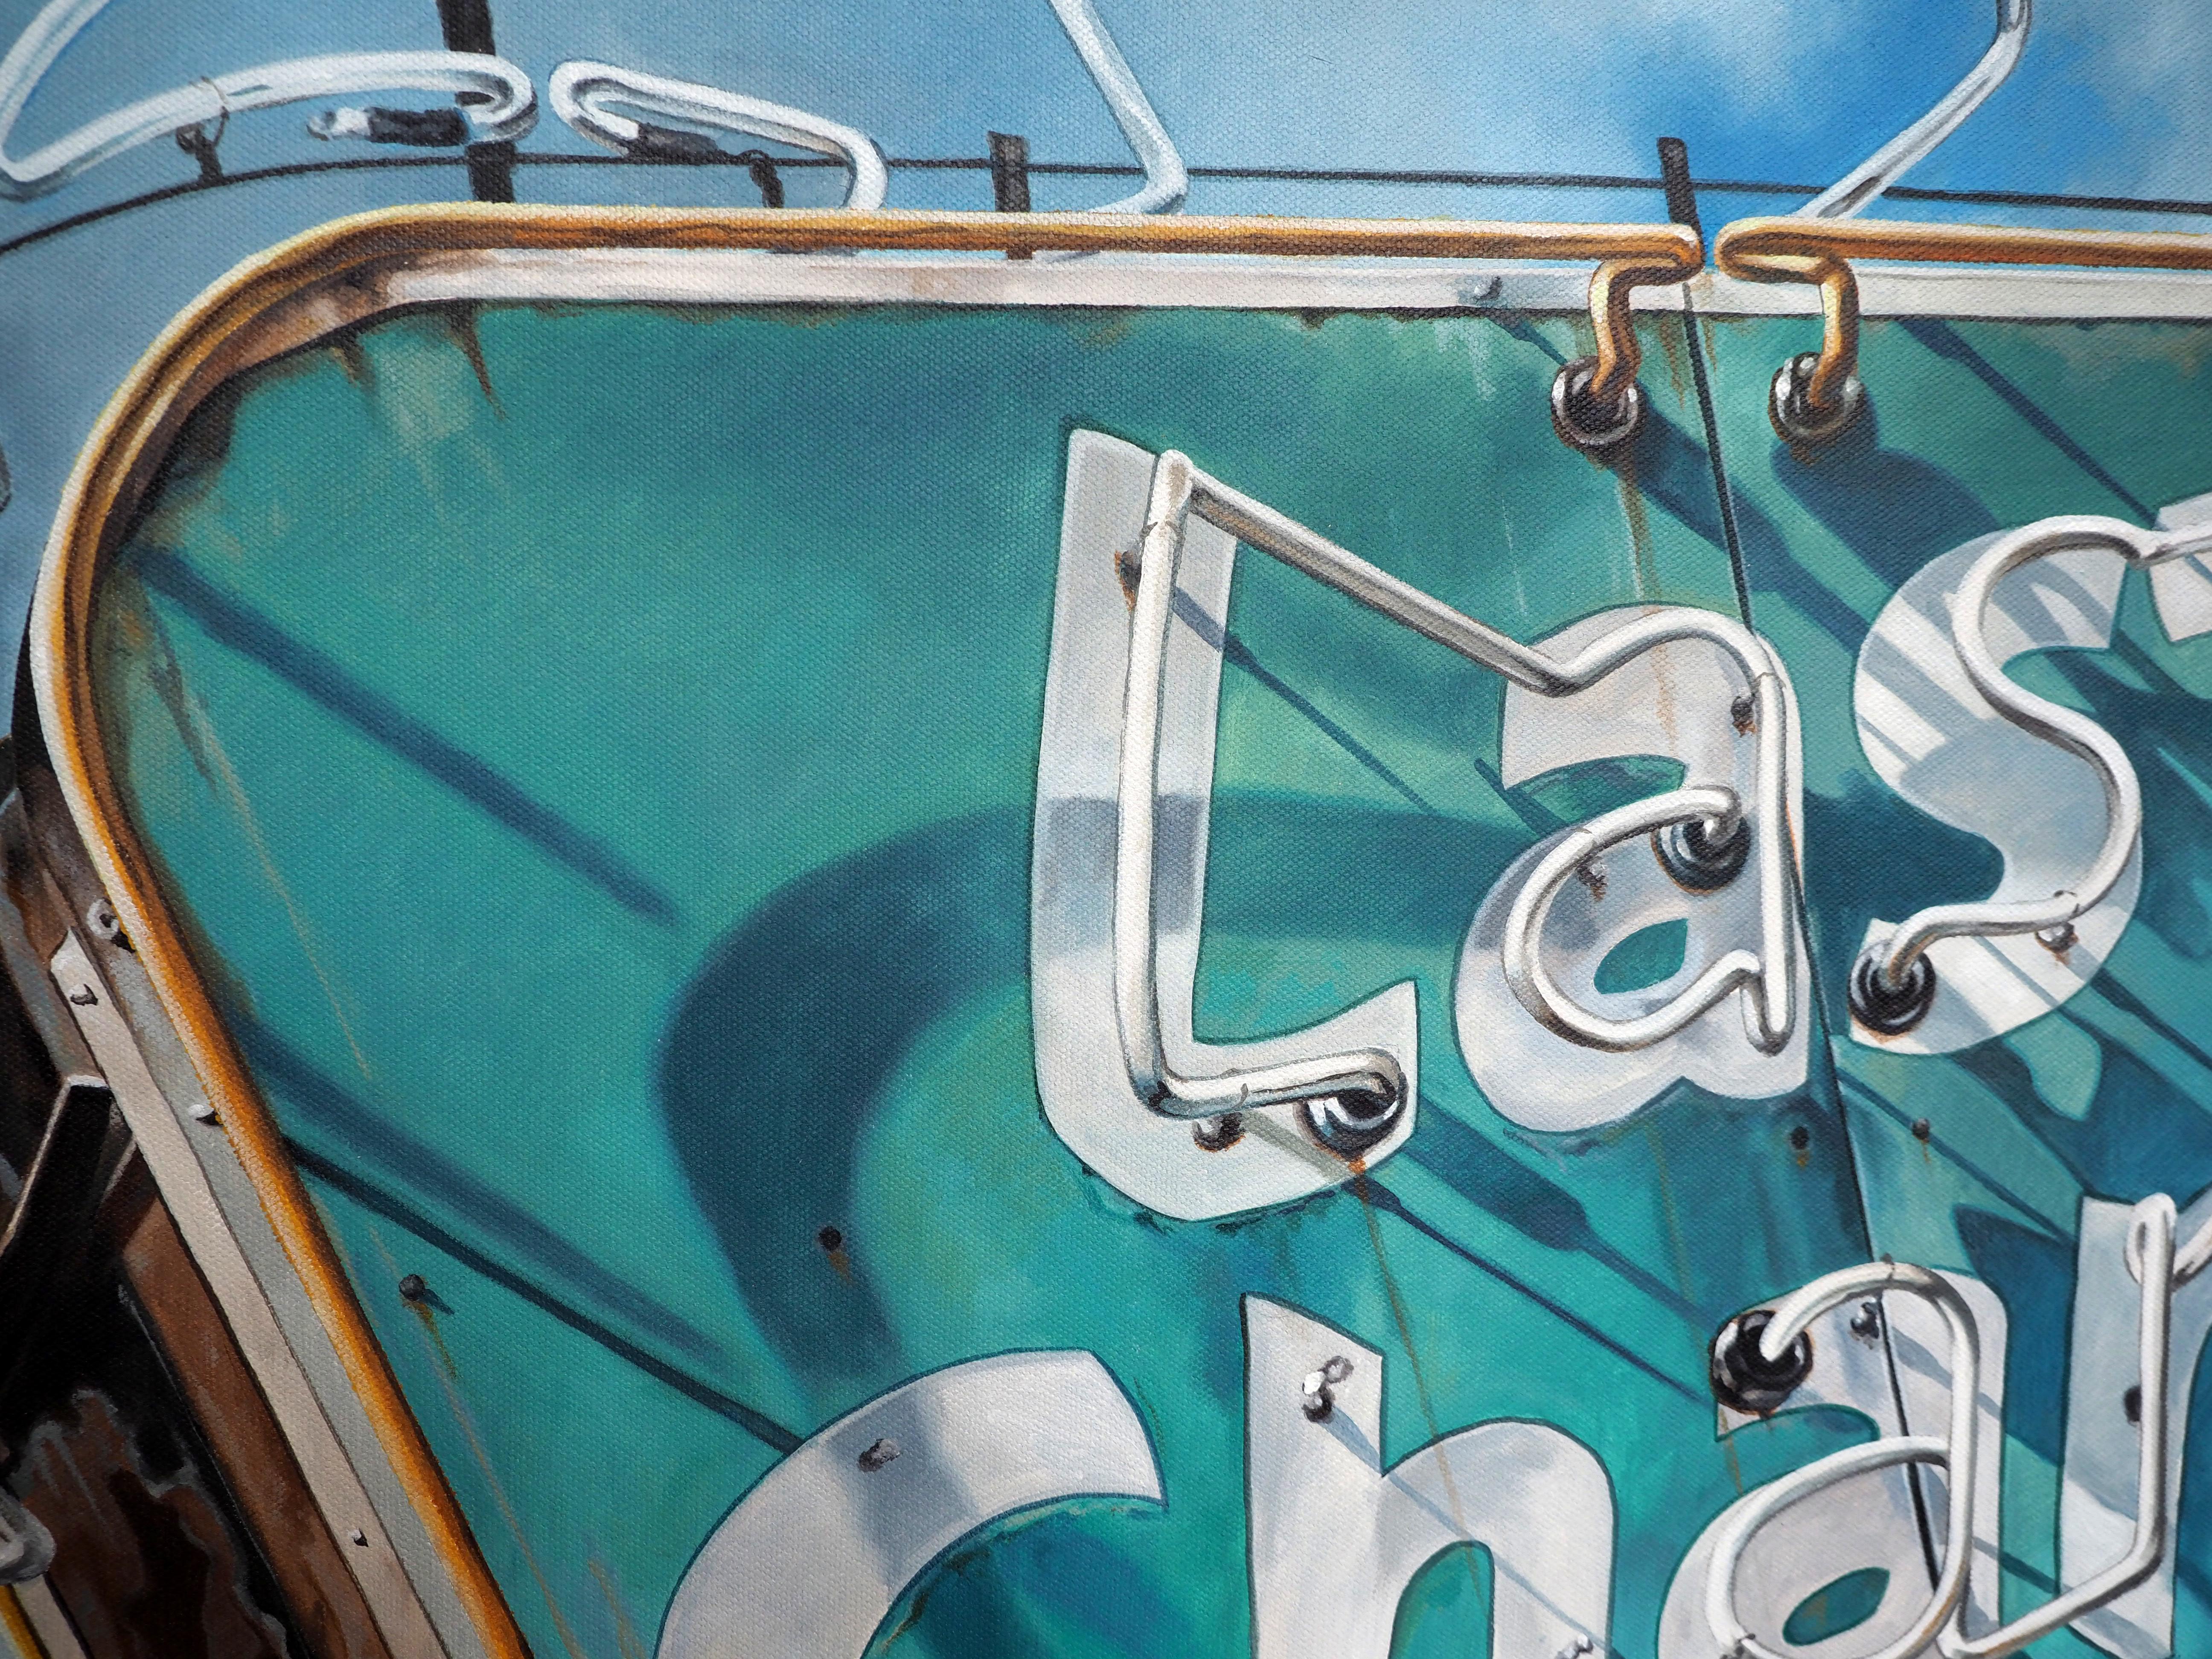 Last Chance is based on a photograph of the Last Chance Liquors store in Nashville, TN. Sharp's hyperrealist mark-making using grey, white, and blue-tones, showcase his clear attention to detail on the vintage sign. Many of his works capture a